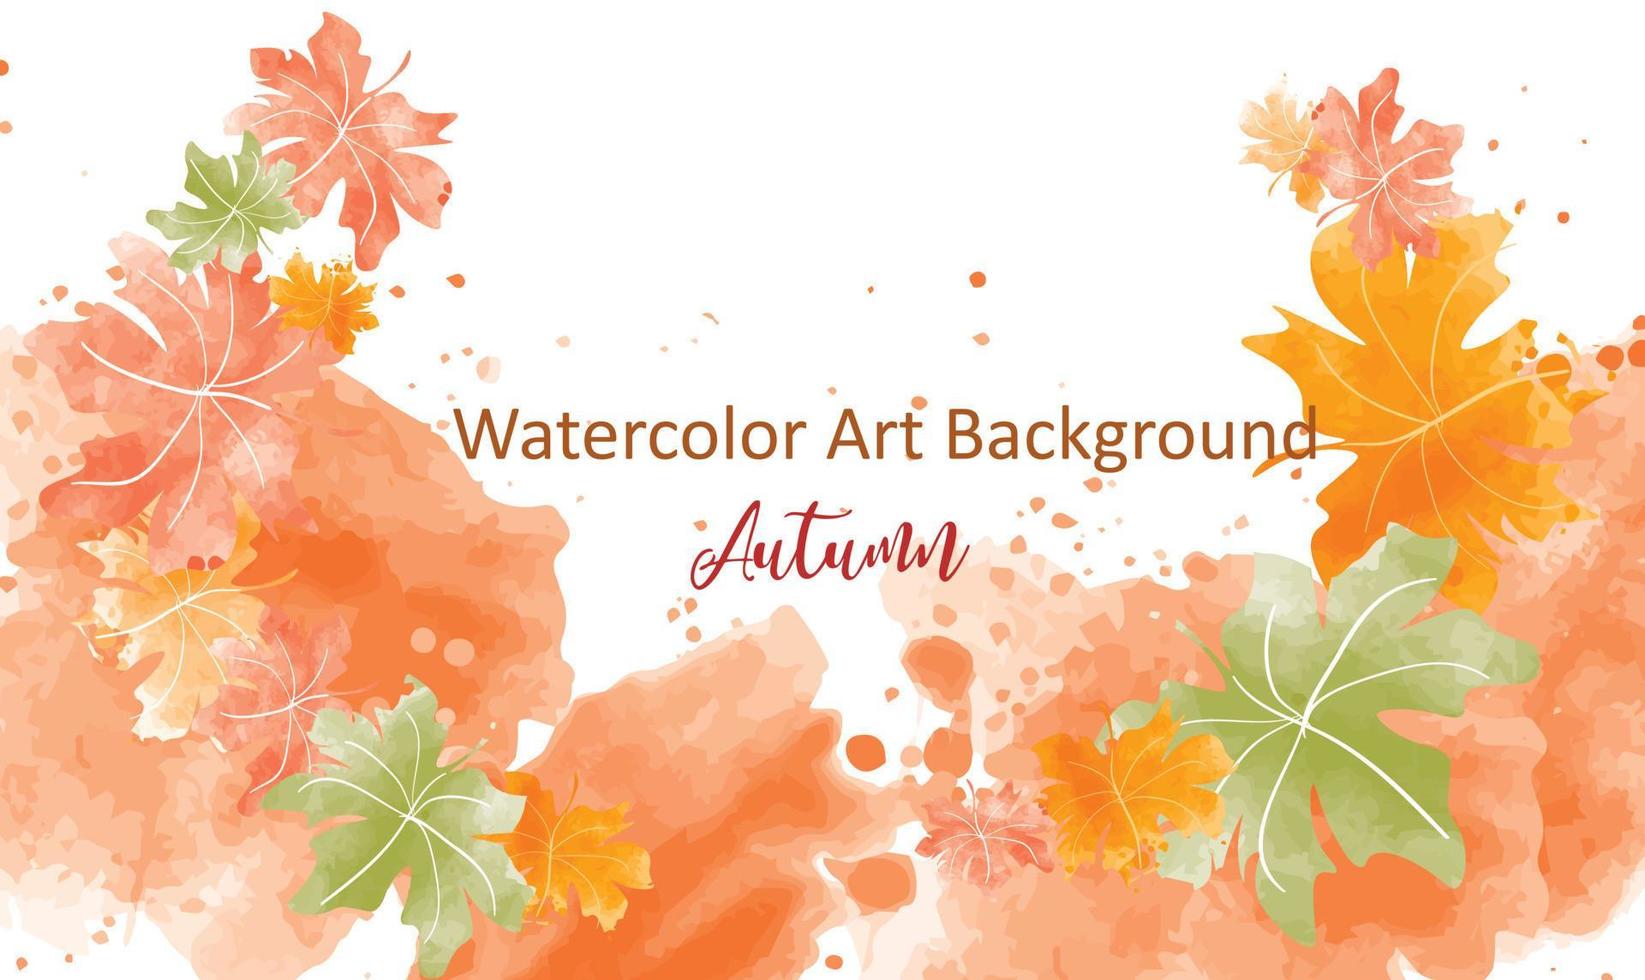 Watercolor abstract background autumn collection with maple and seasonal leaves. Hand-painted watercolor natural art, perfect for your designed header, banner, web, wall, cards, etc. vector